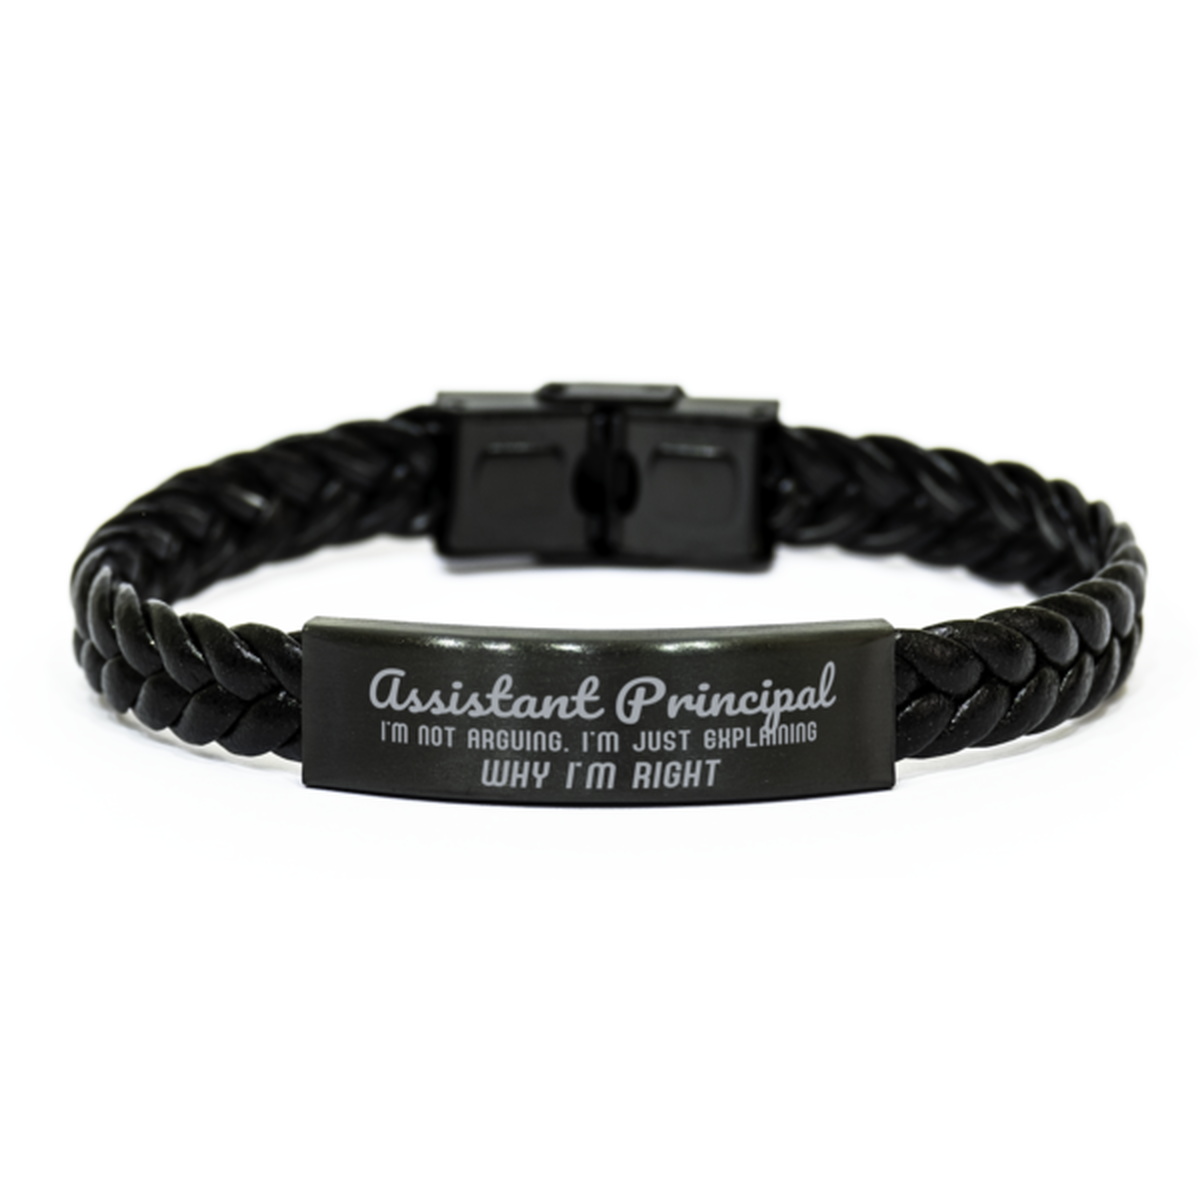 Assistant Principal I'm not Arguing. I'm Just Explaining Why I'm RIGHT Braided Leather Bracelet, Graduation Birthday Christmas Assistant Principal Gifts For Assistant Principal Funny Saying Quote Present for Men Women Coworker